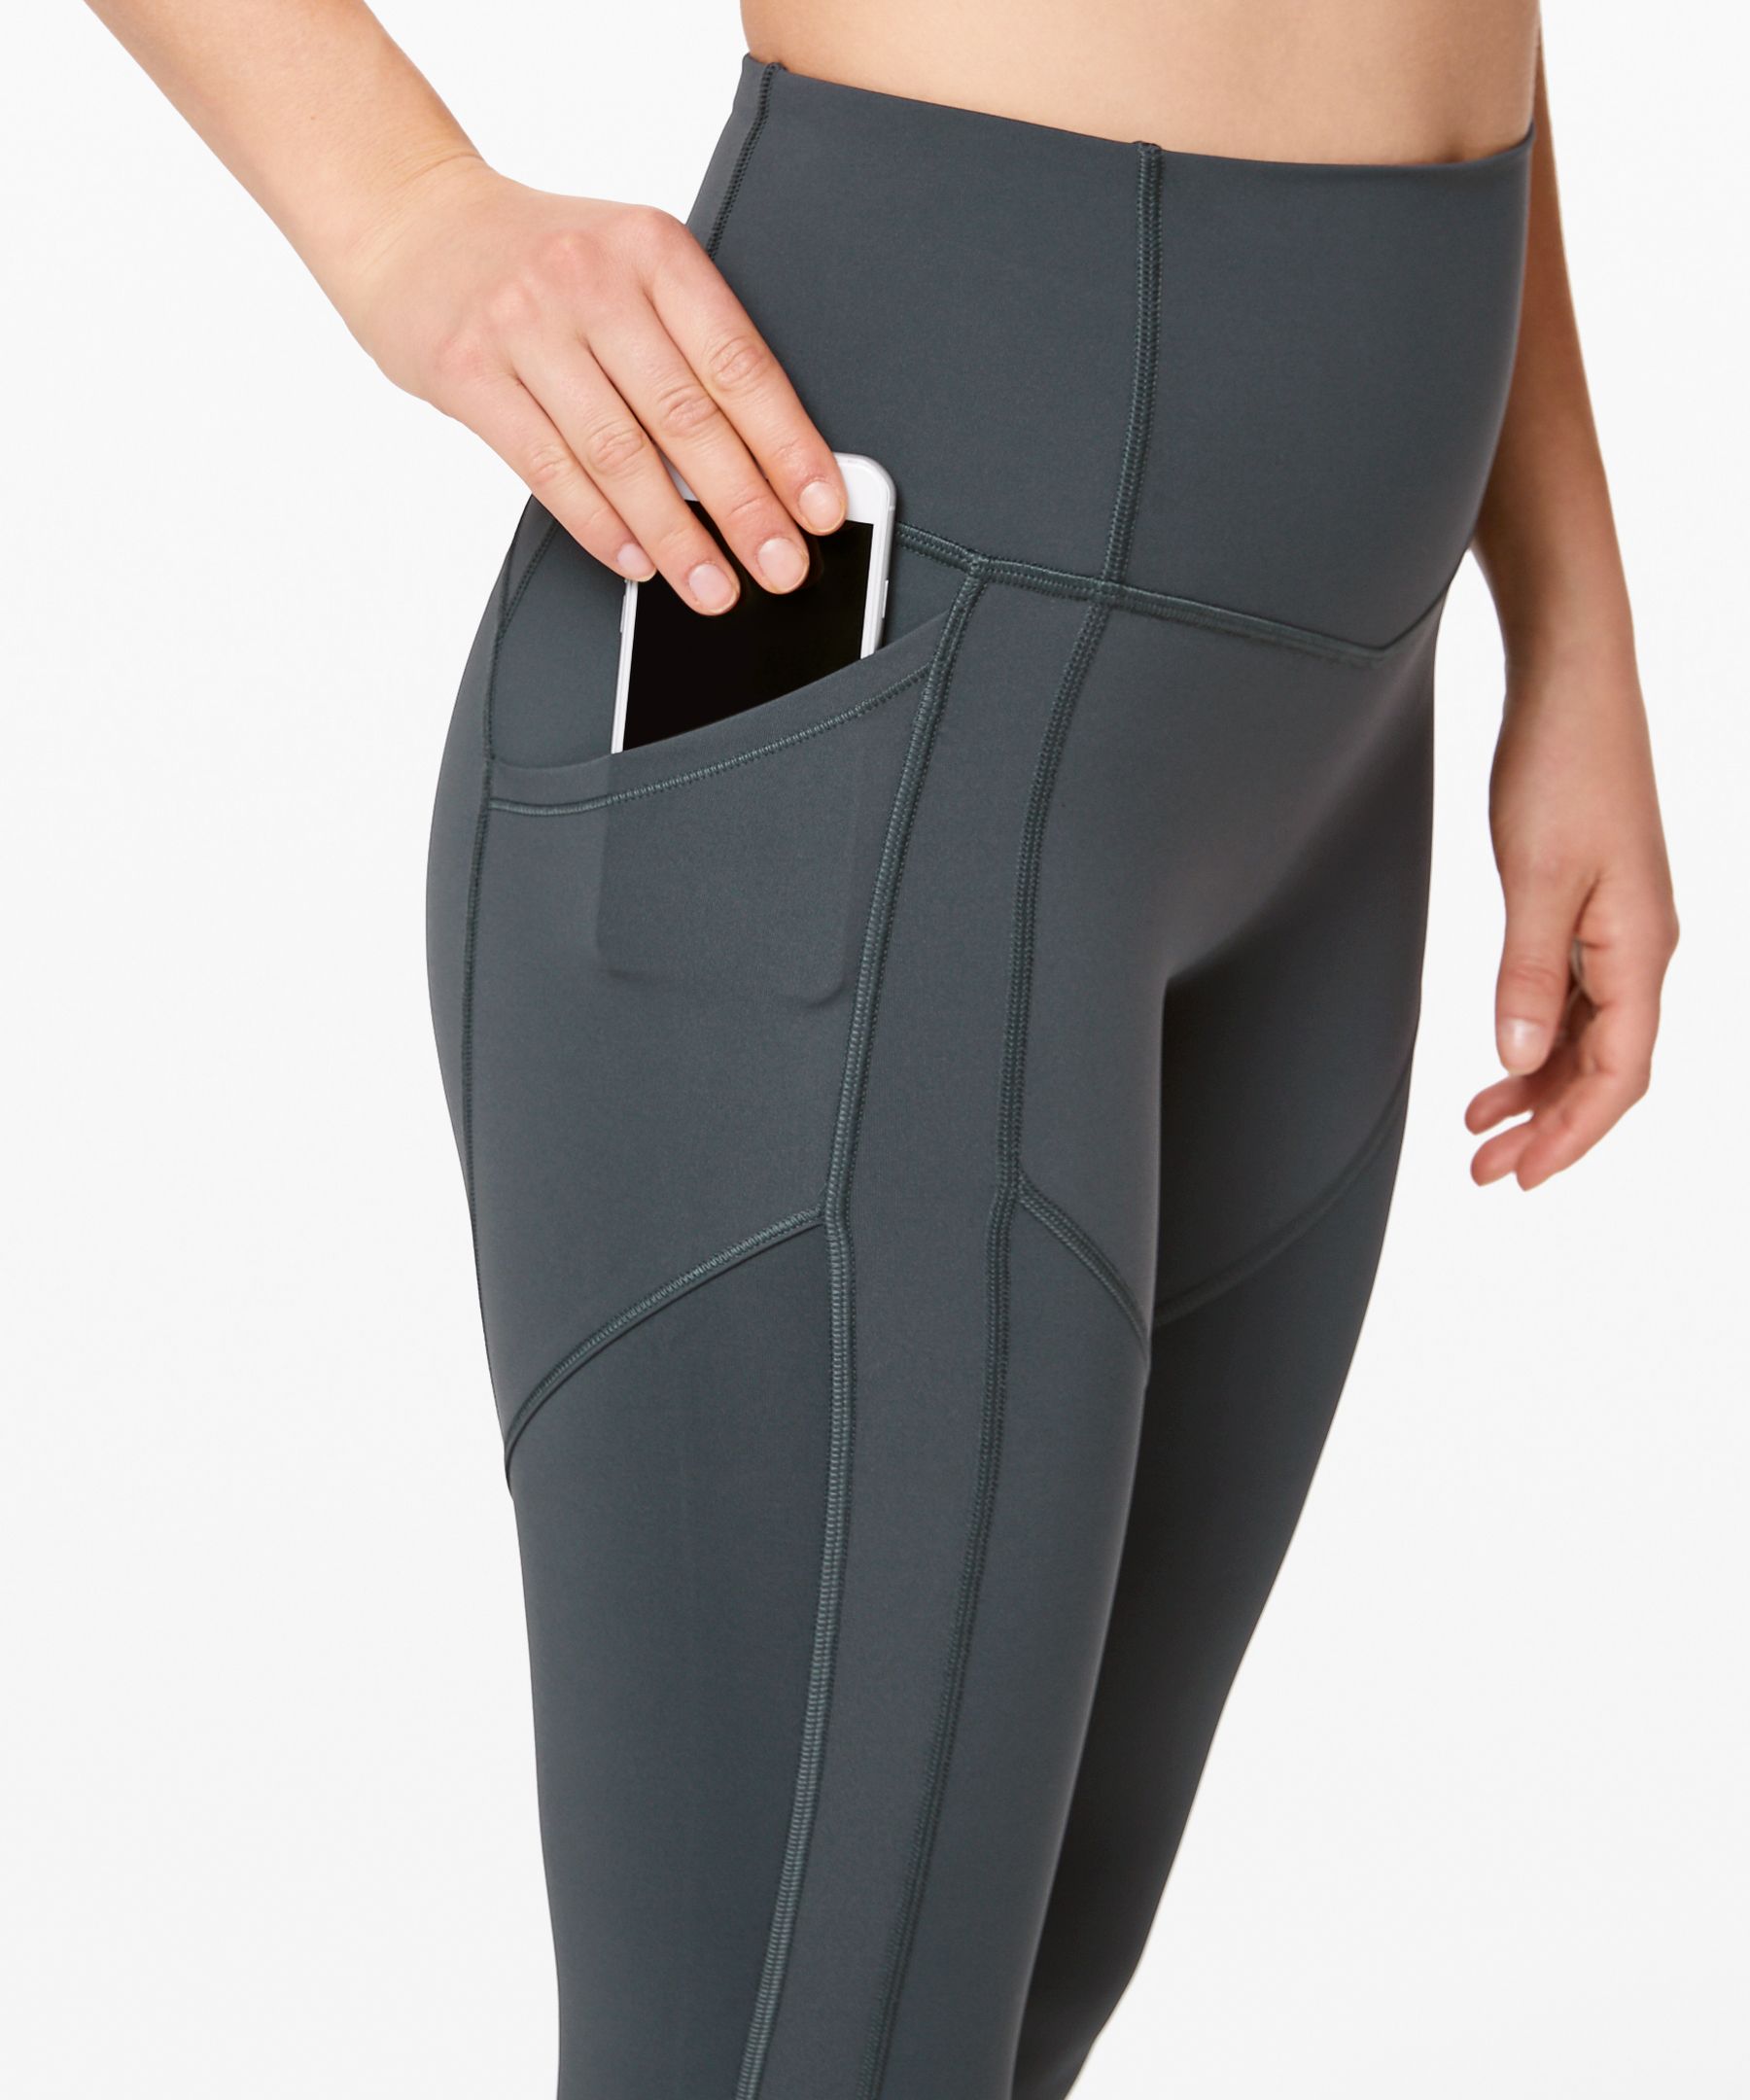 Lululemon All The Right Places Pant II 28 - Athletic apparel